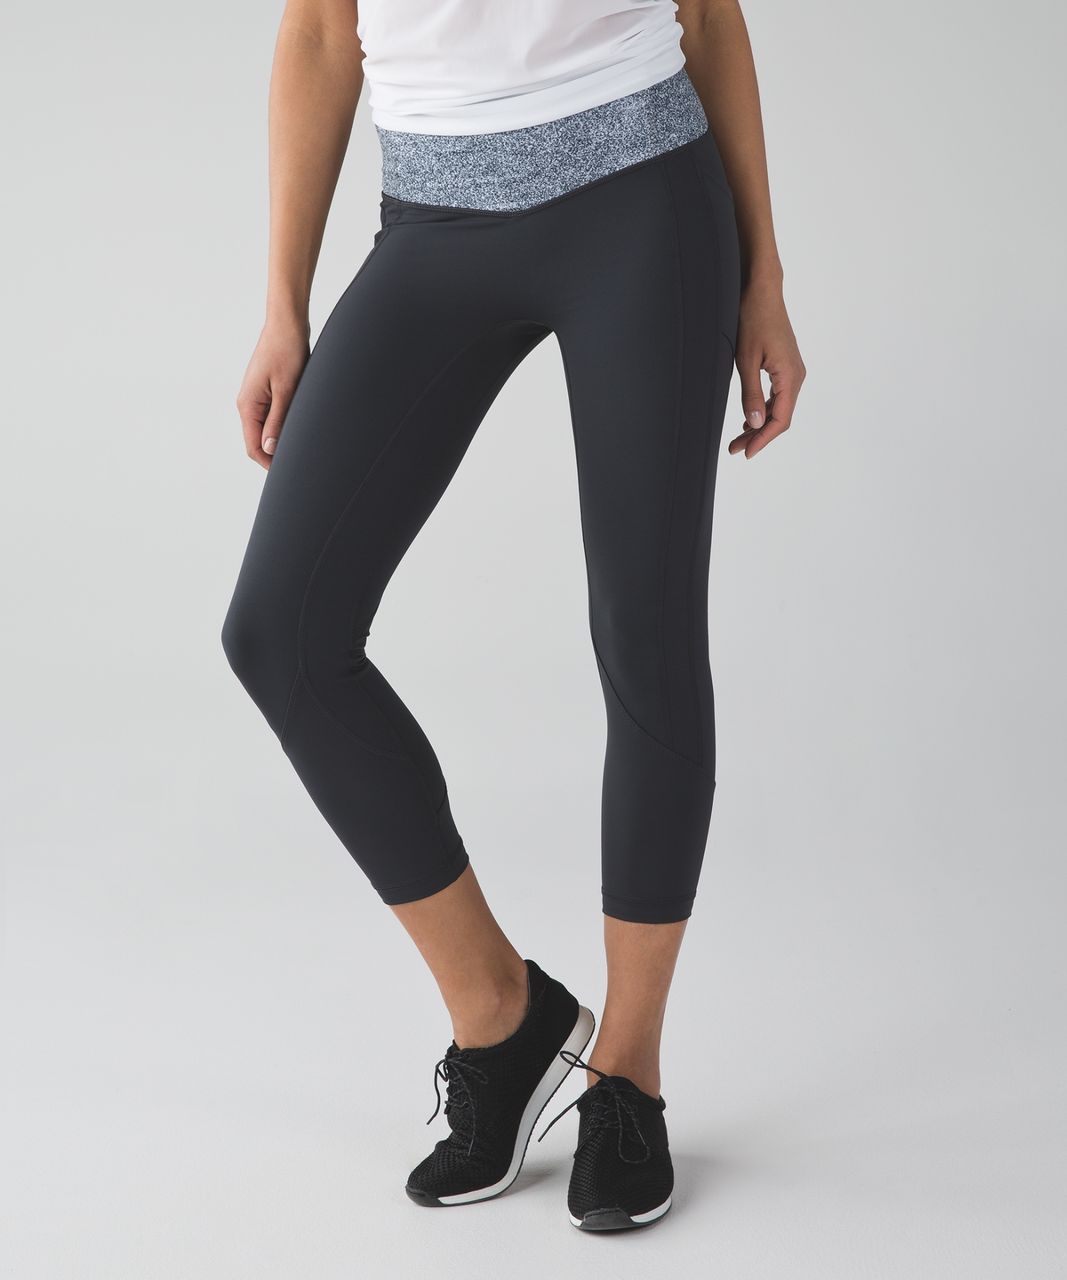 Lululemon All The Right Places Crop II - Deep Coal / Rio Mist White Black